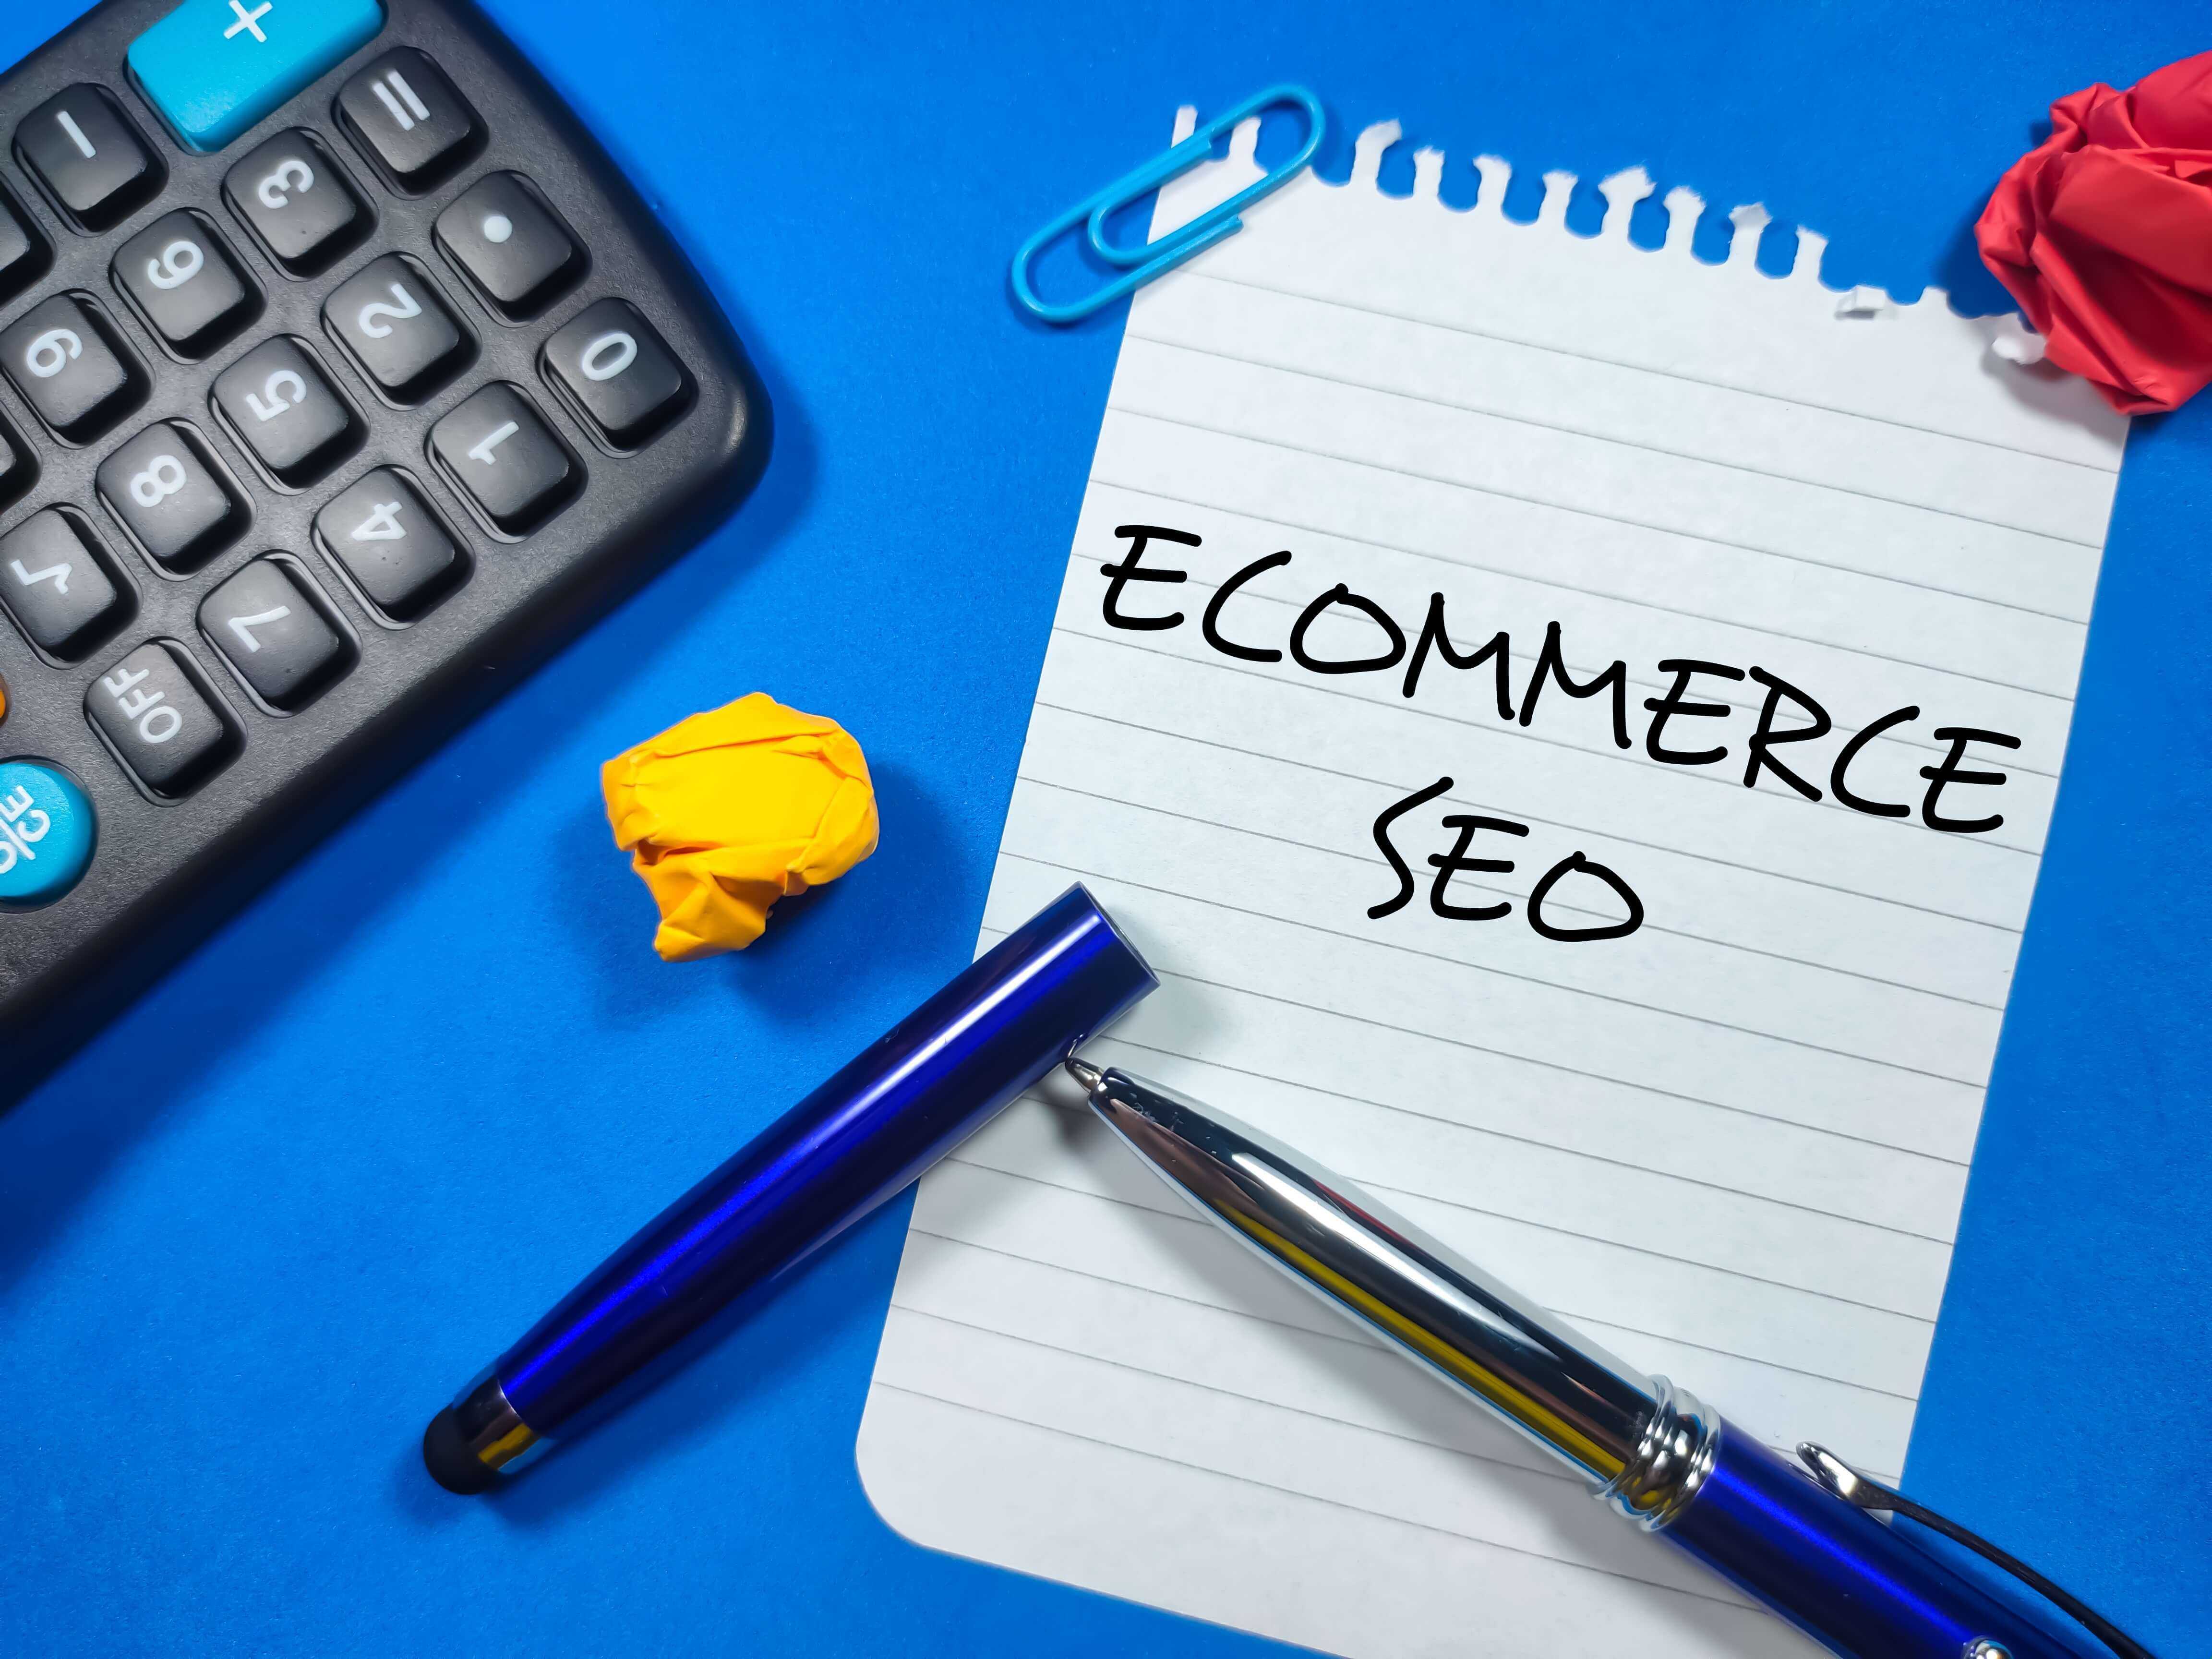 5 SEO Tips for Ecommerce Brands to Grow Your Business